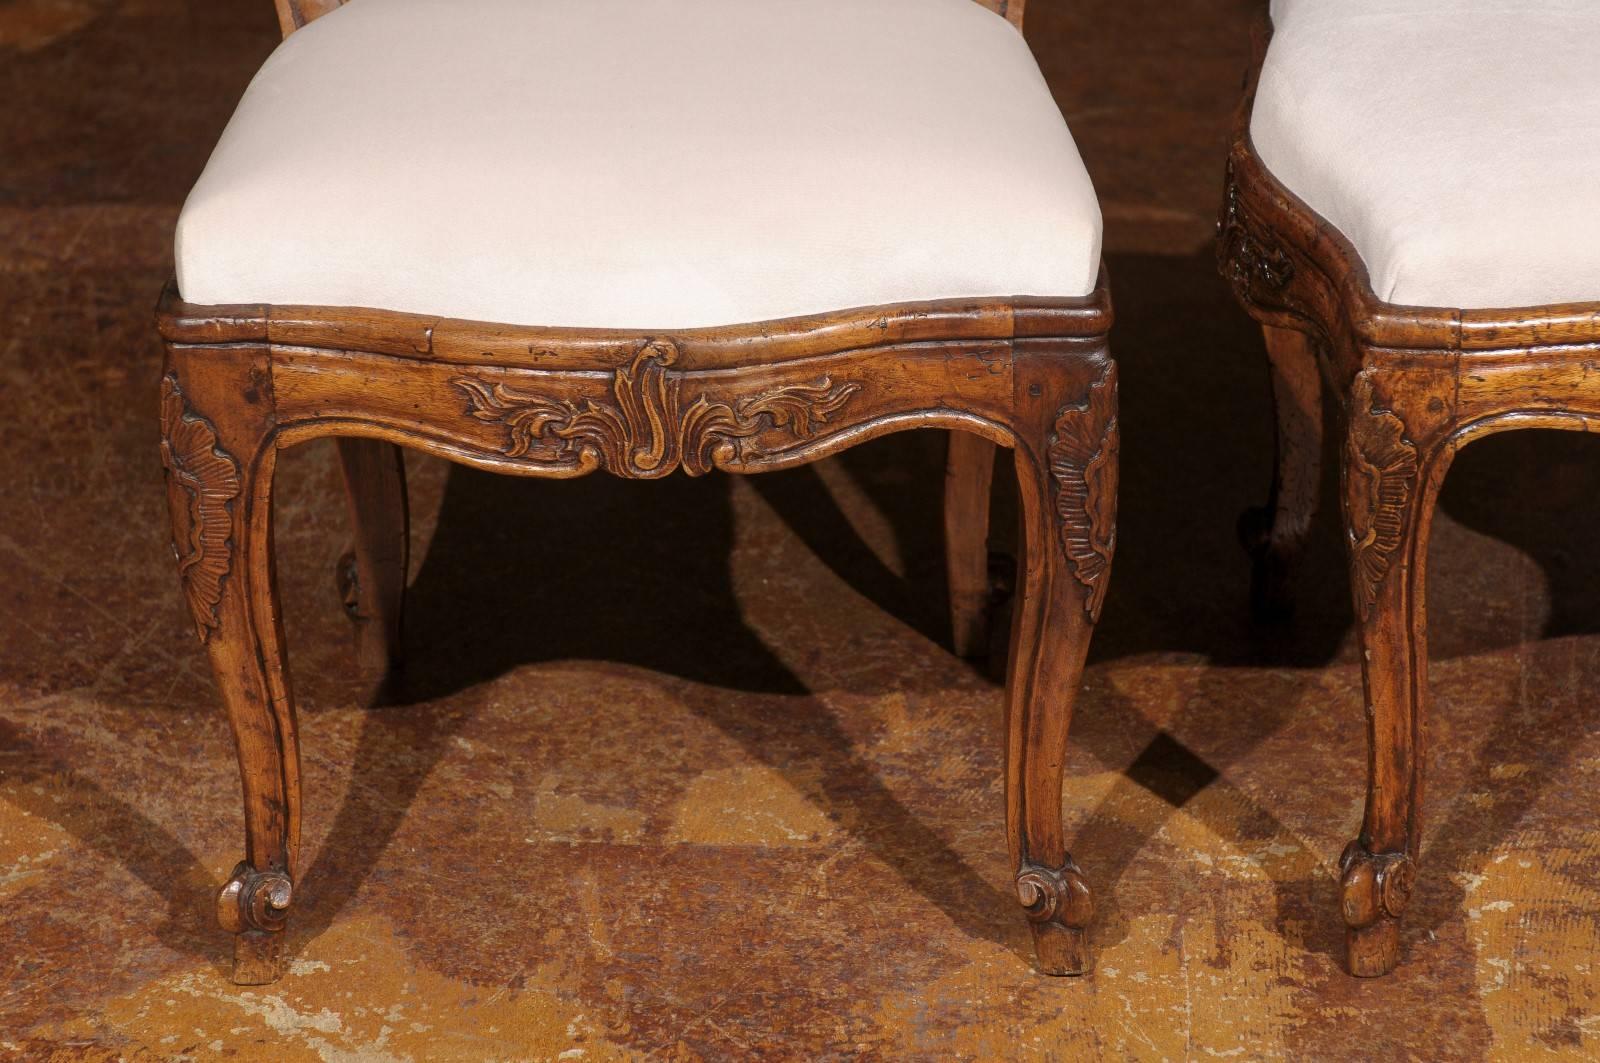 Upholstery Set of 12 Italian Louis XV Style Upholstered Chairs with Rocailles, circa 1880